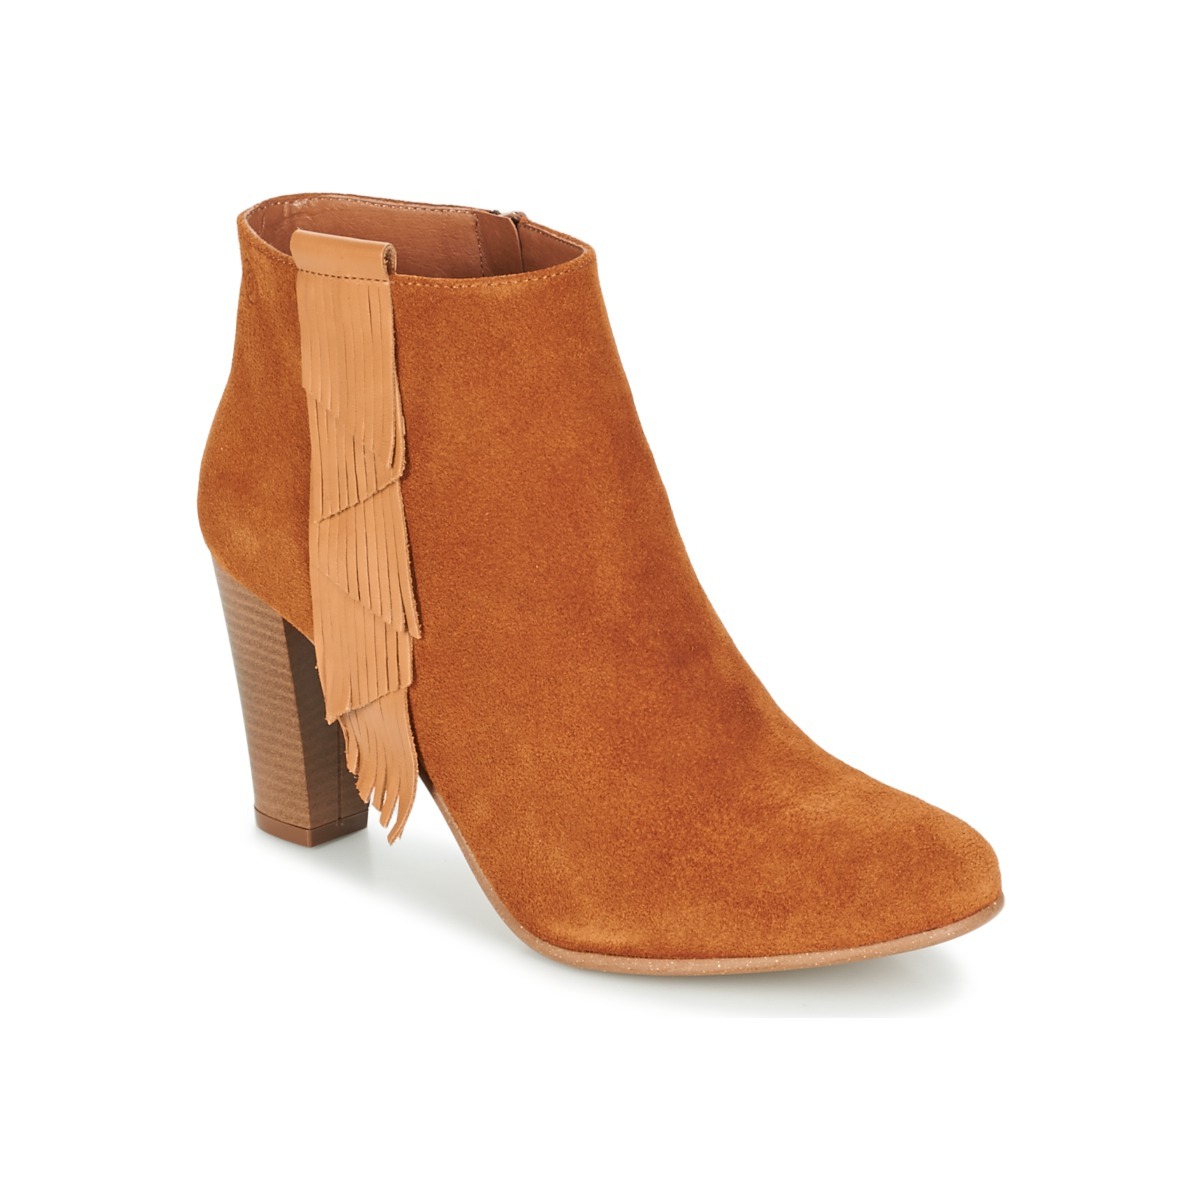 Spartoo - Ladies Ankle Boots - Brown - Betty London GOOFASH